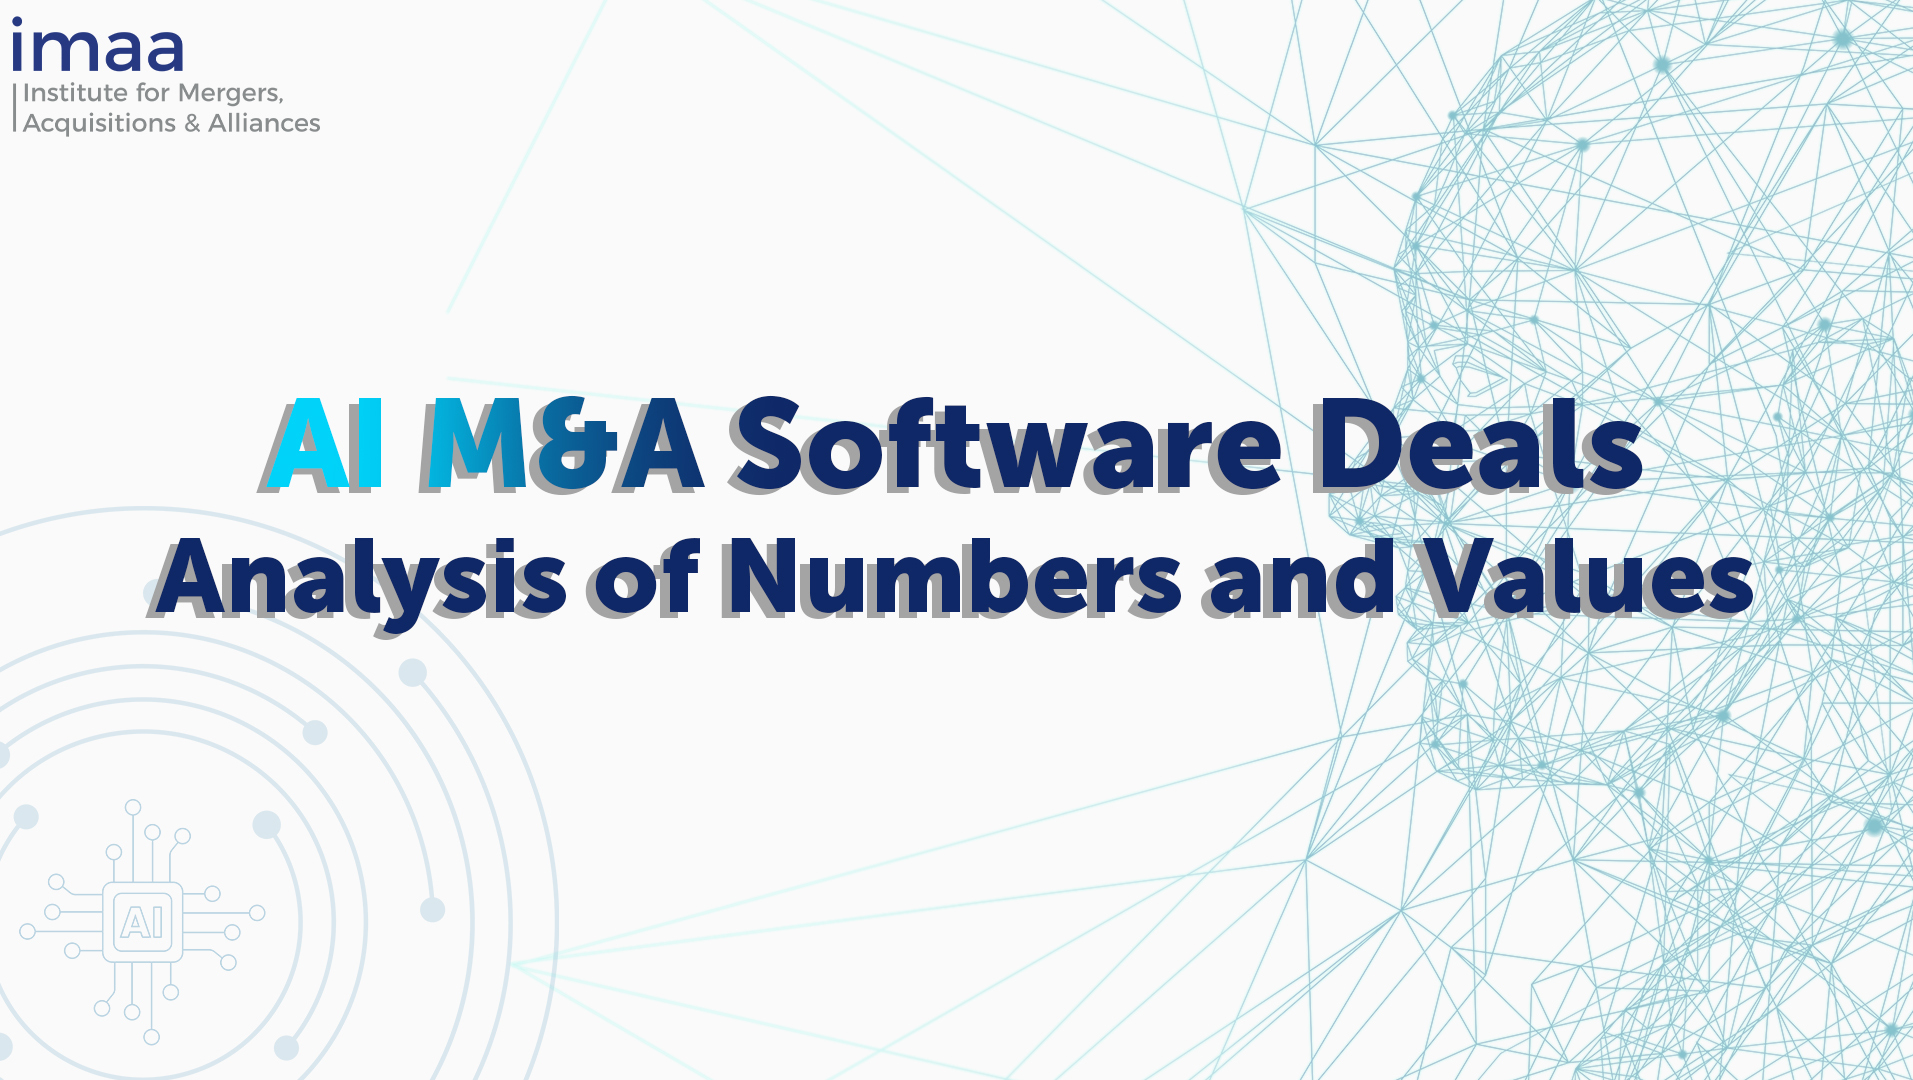 AI M&A Software Deals - Analysis of Numbers and Values